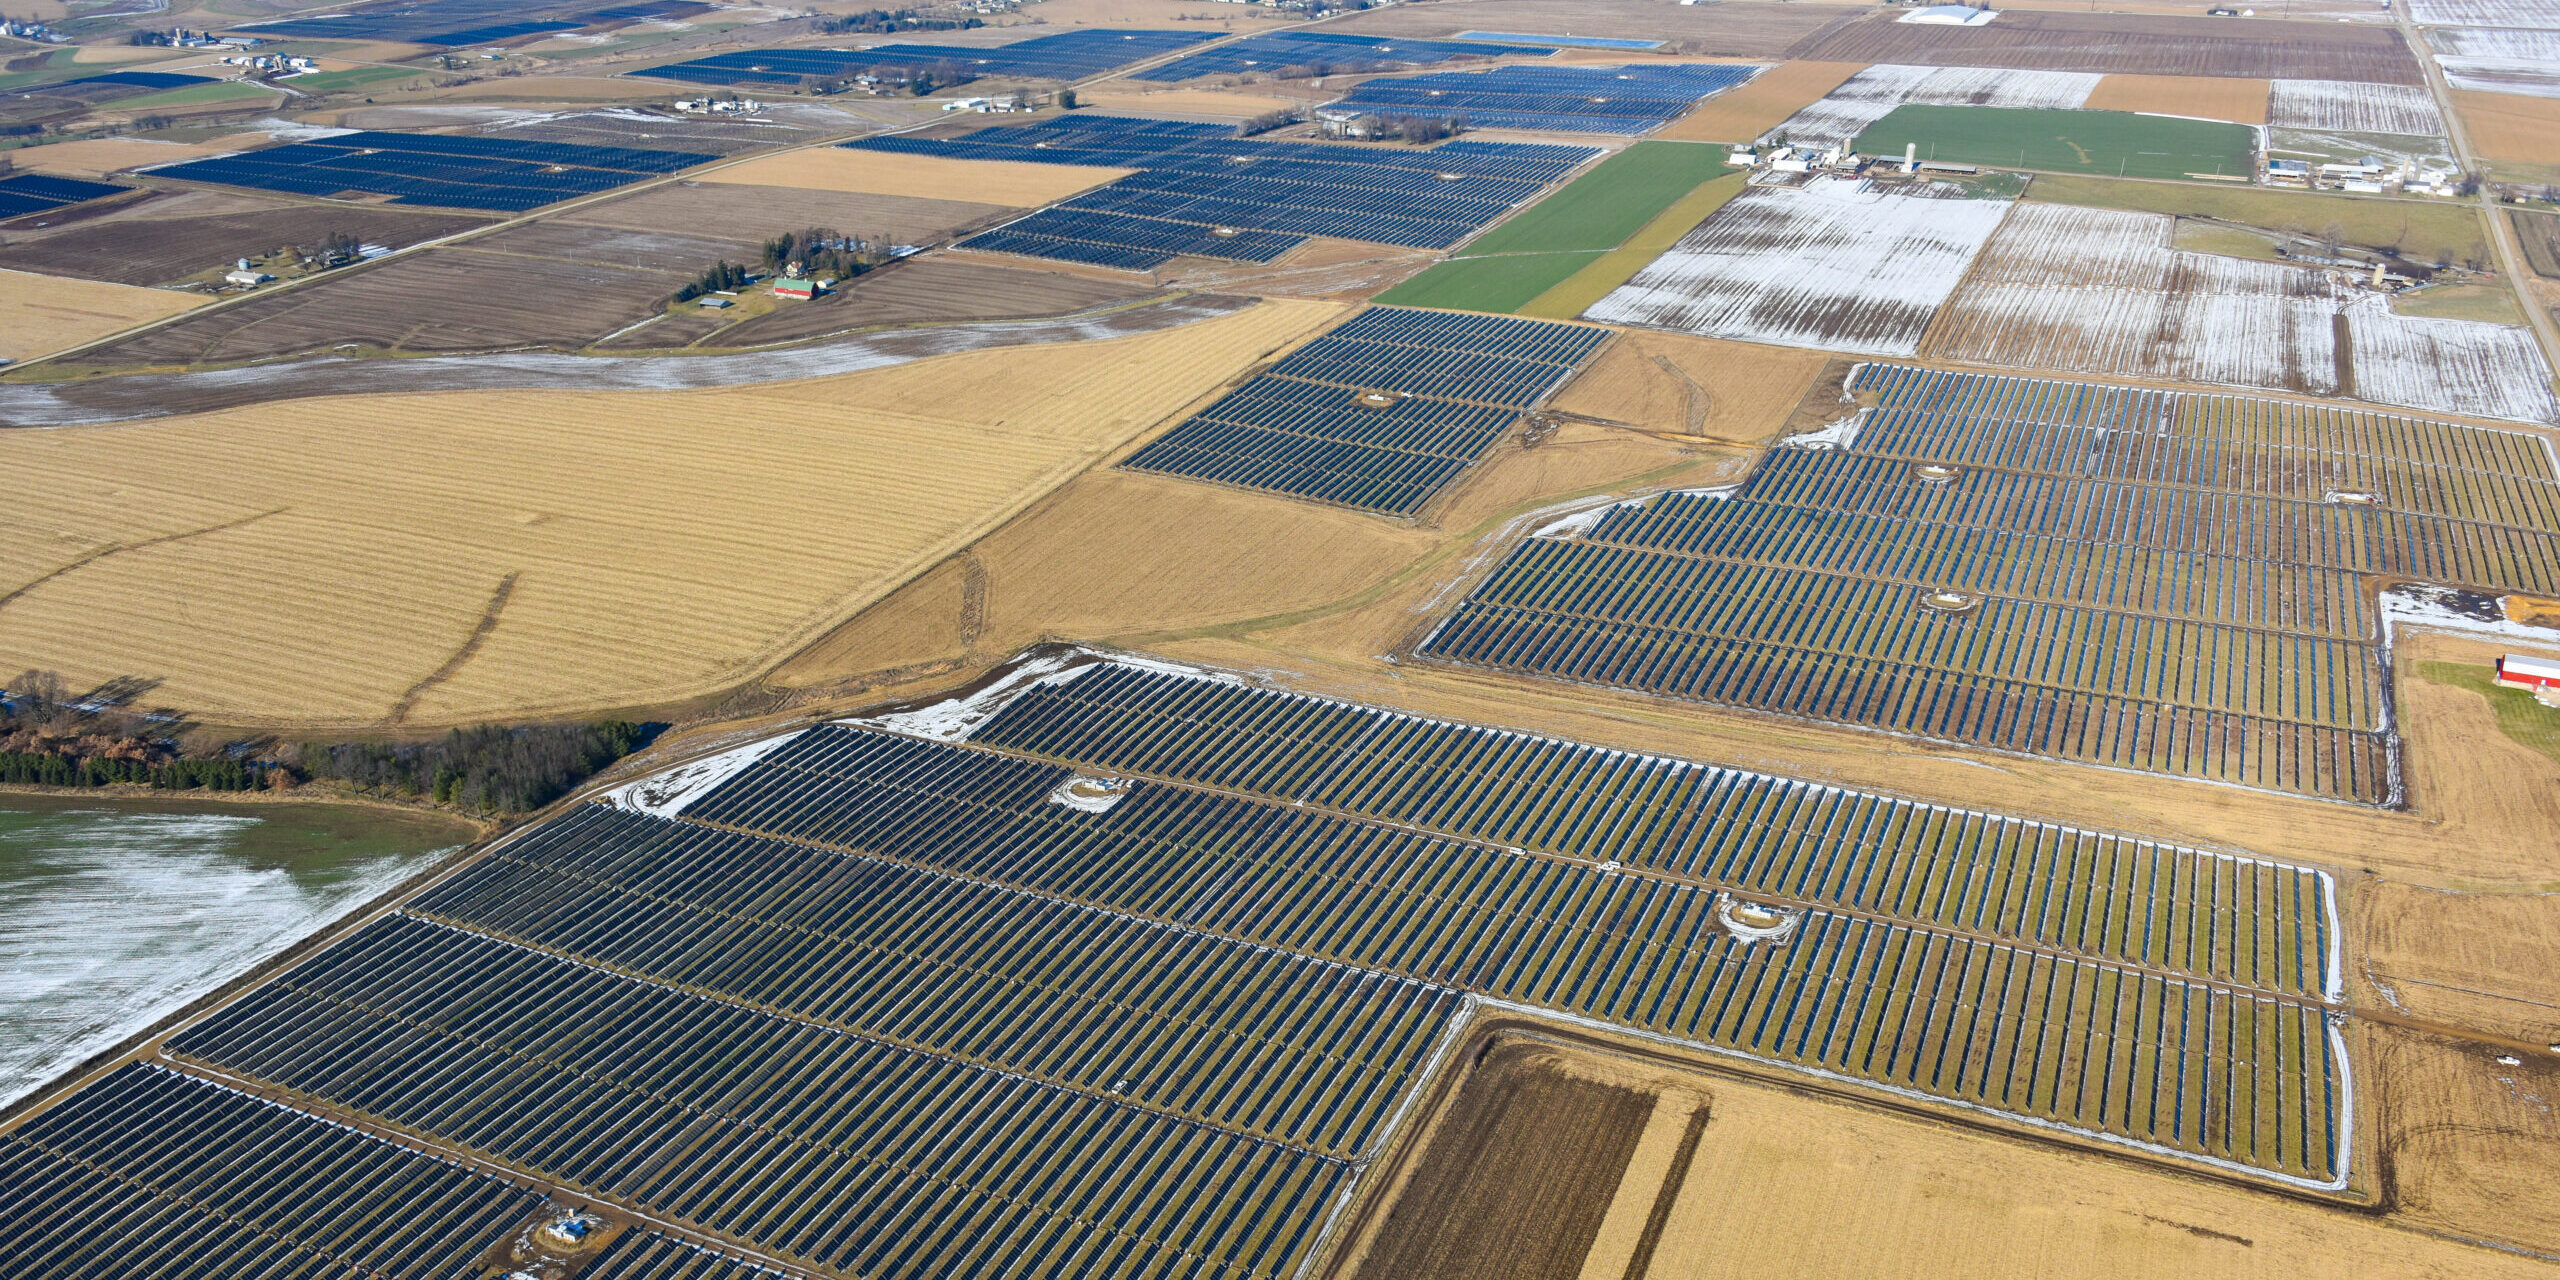 Aerial view of large blocks of solar panels installed among farm fields.